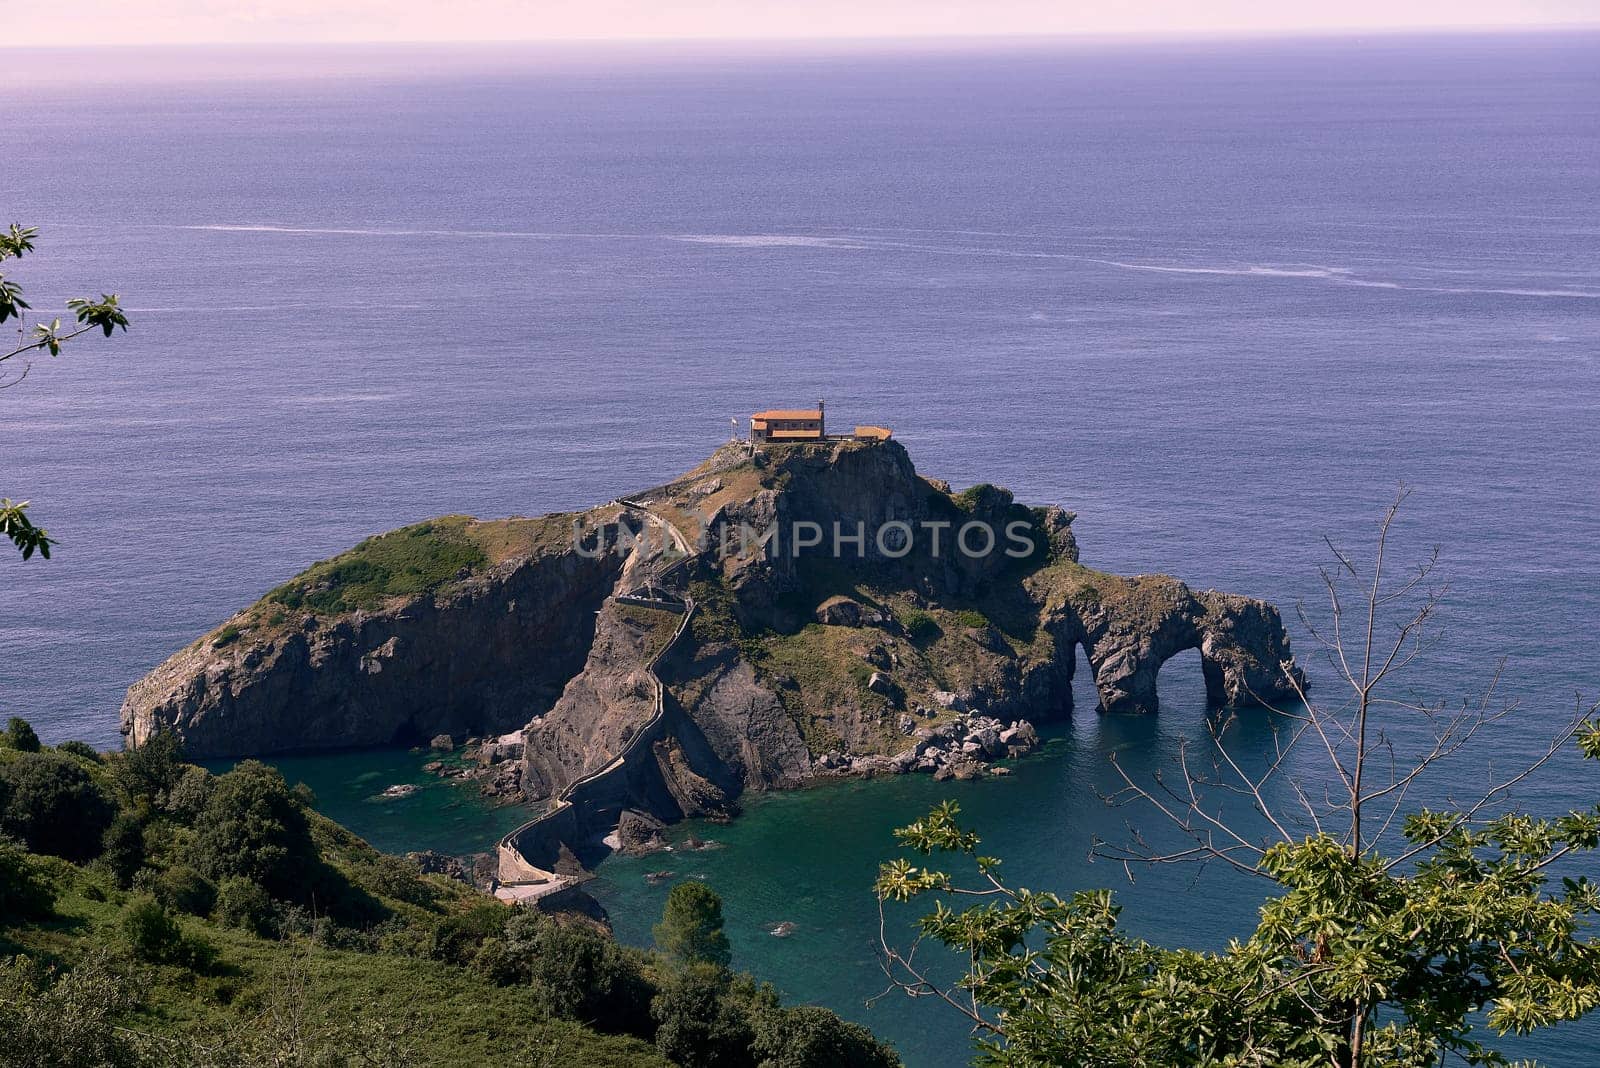 Hermitage of San Juan de Gaztelugatxe on a sunny day. calm sea, rocky formation, holes, frame of branches and trees